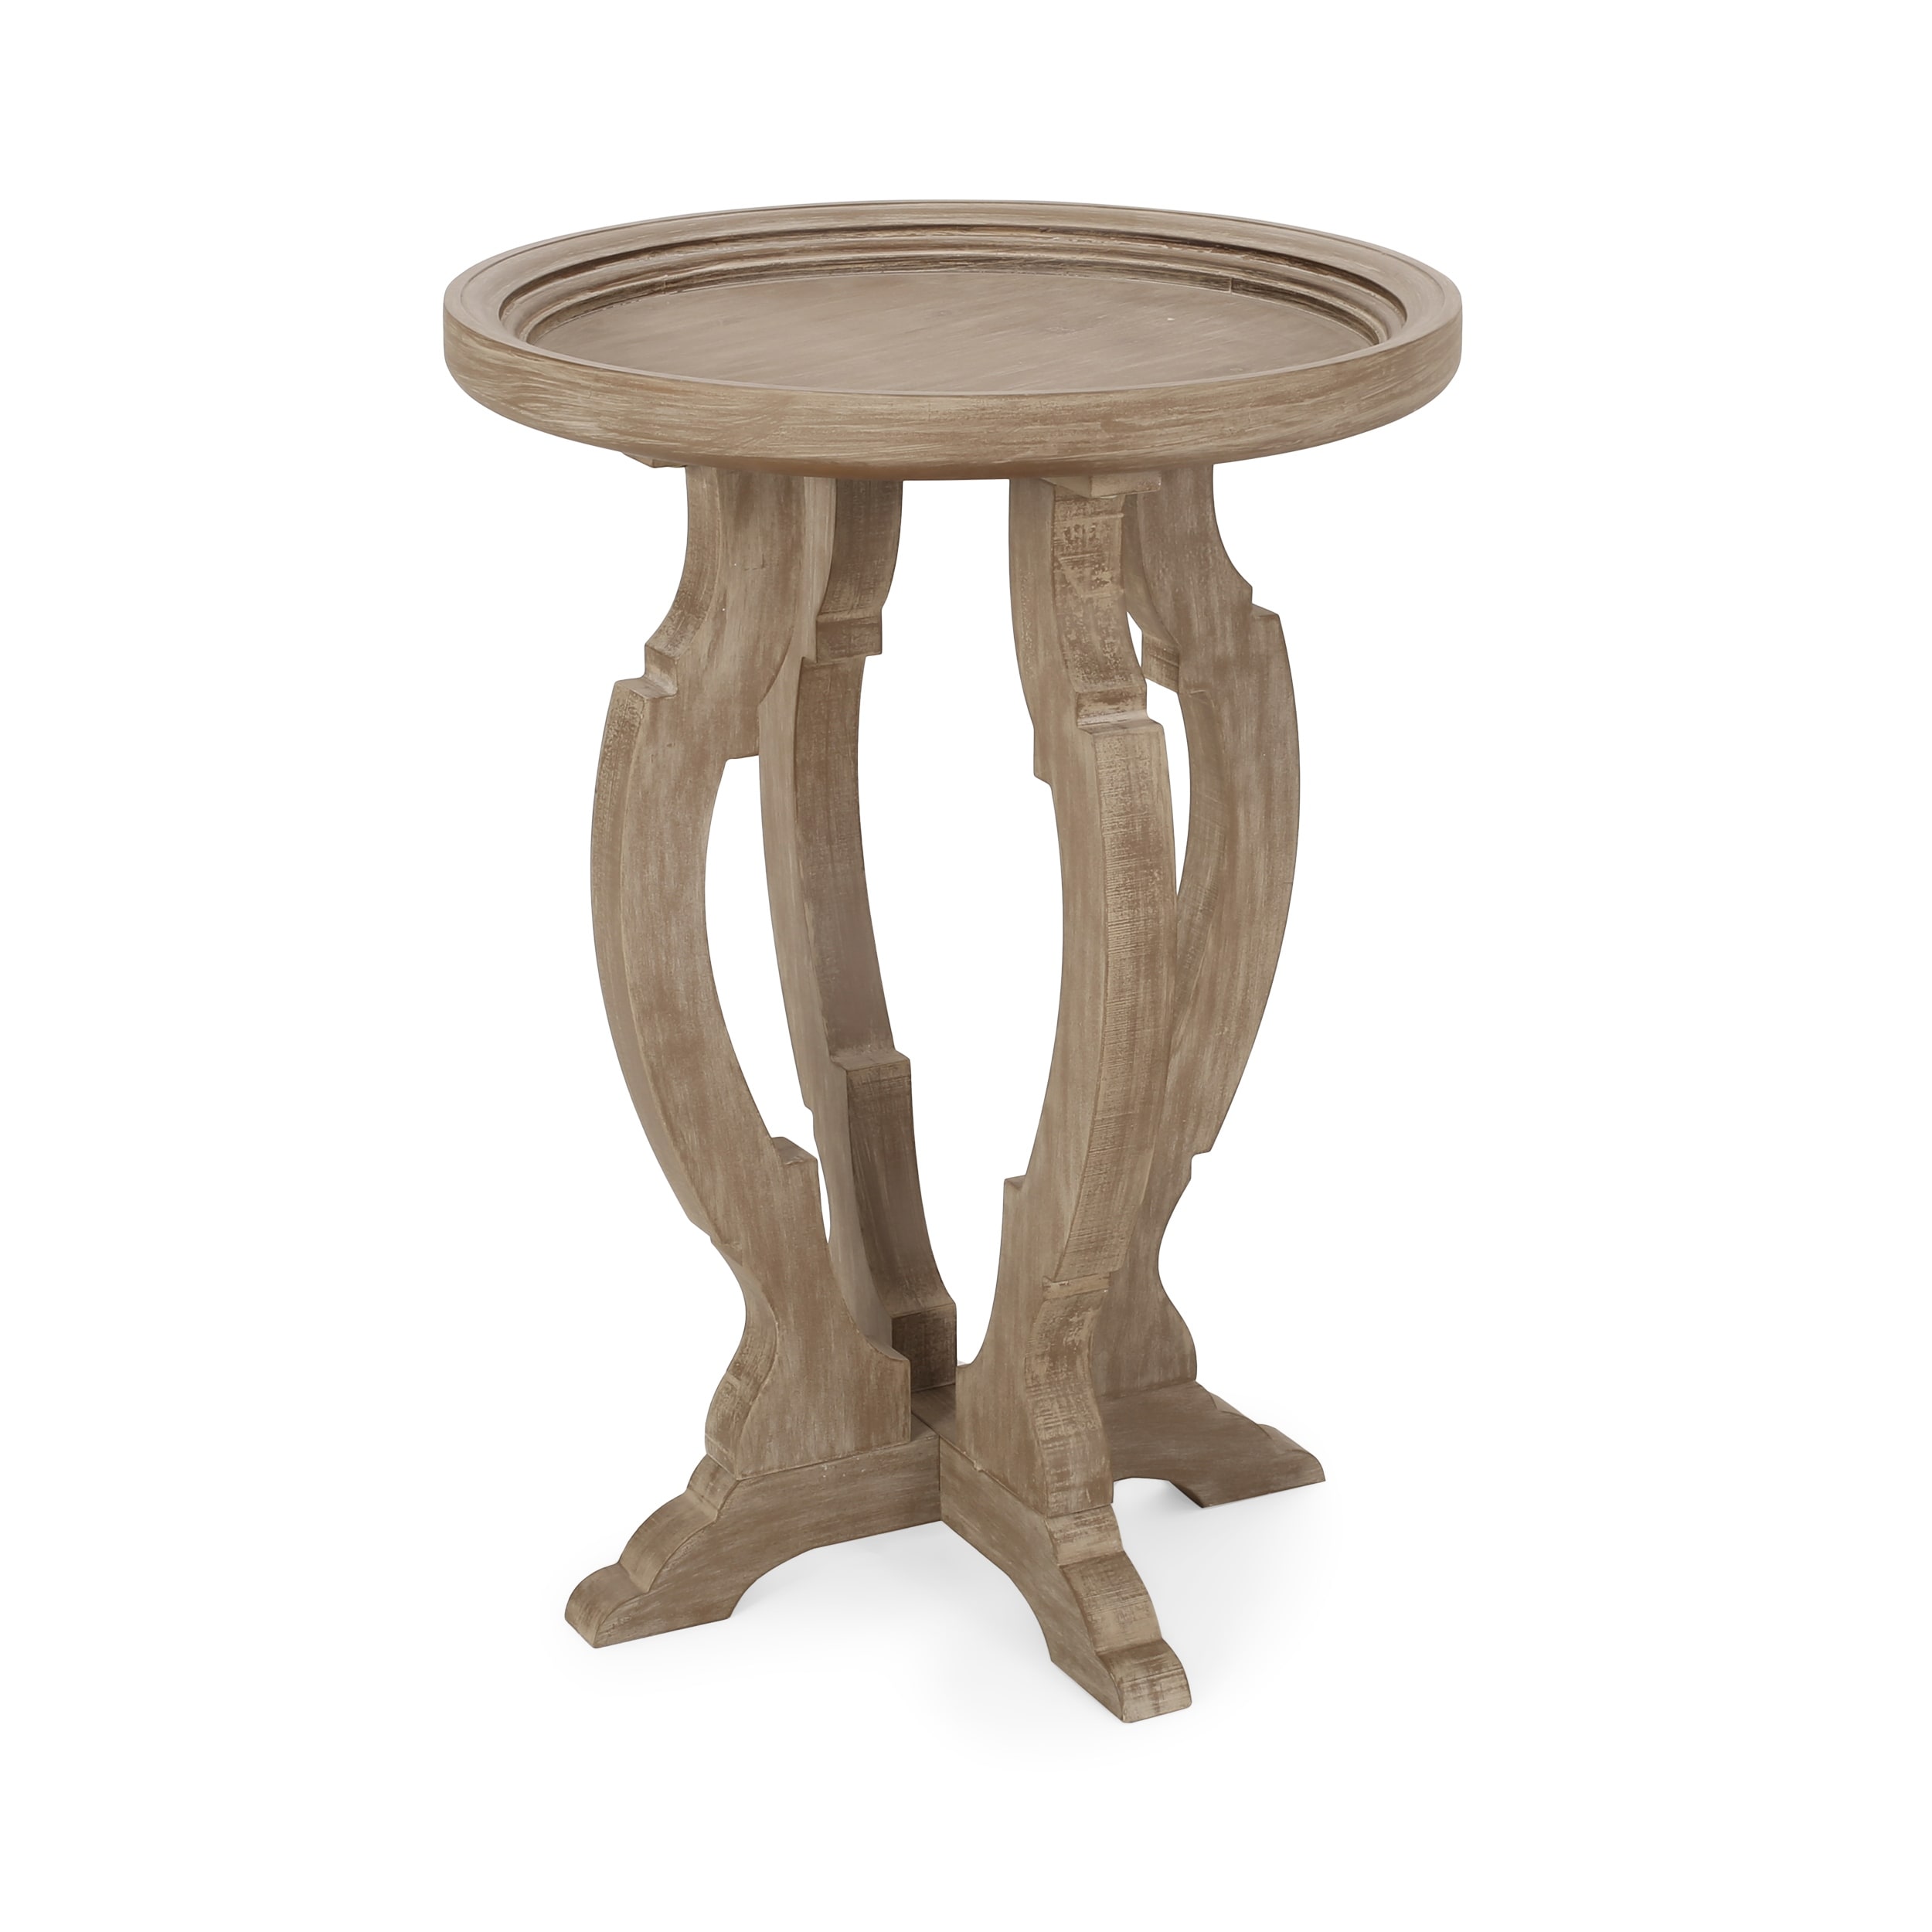 Christopher Knight Home Purdin French Country Accent Table with Round Top